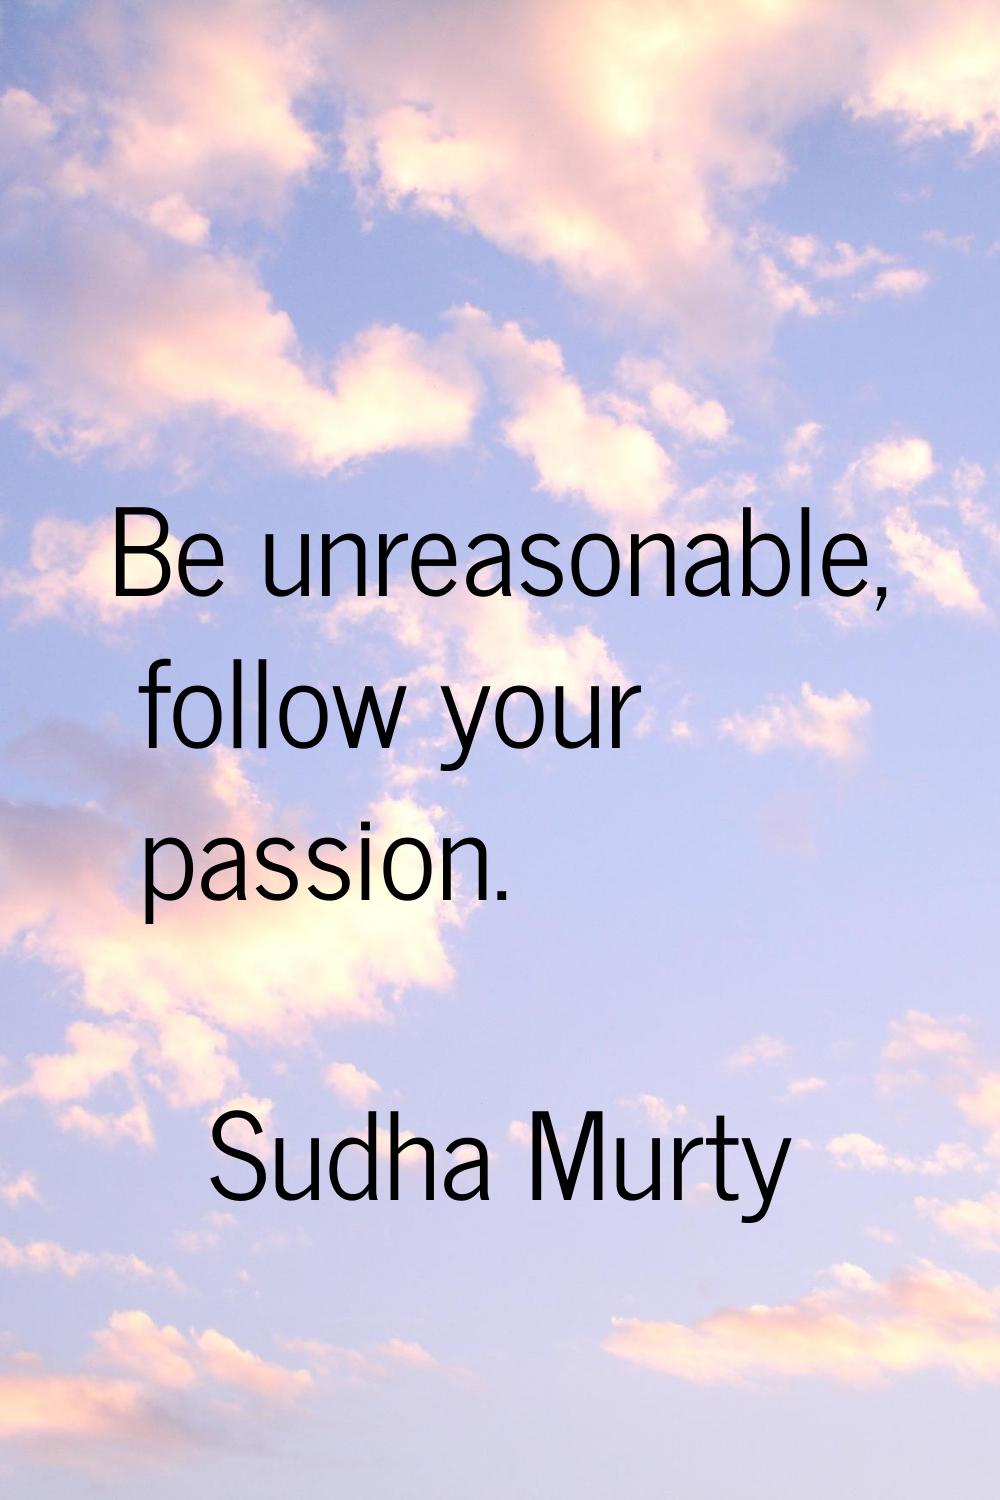 Be unreasonable, follow your passion.